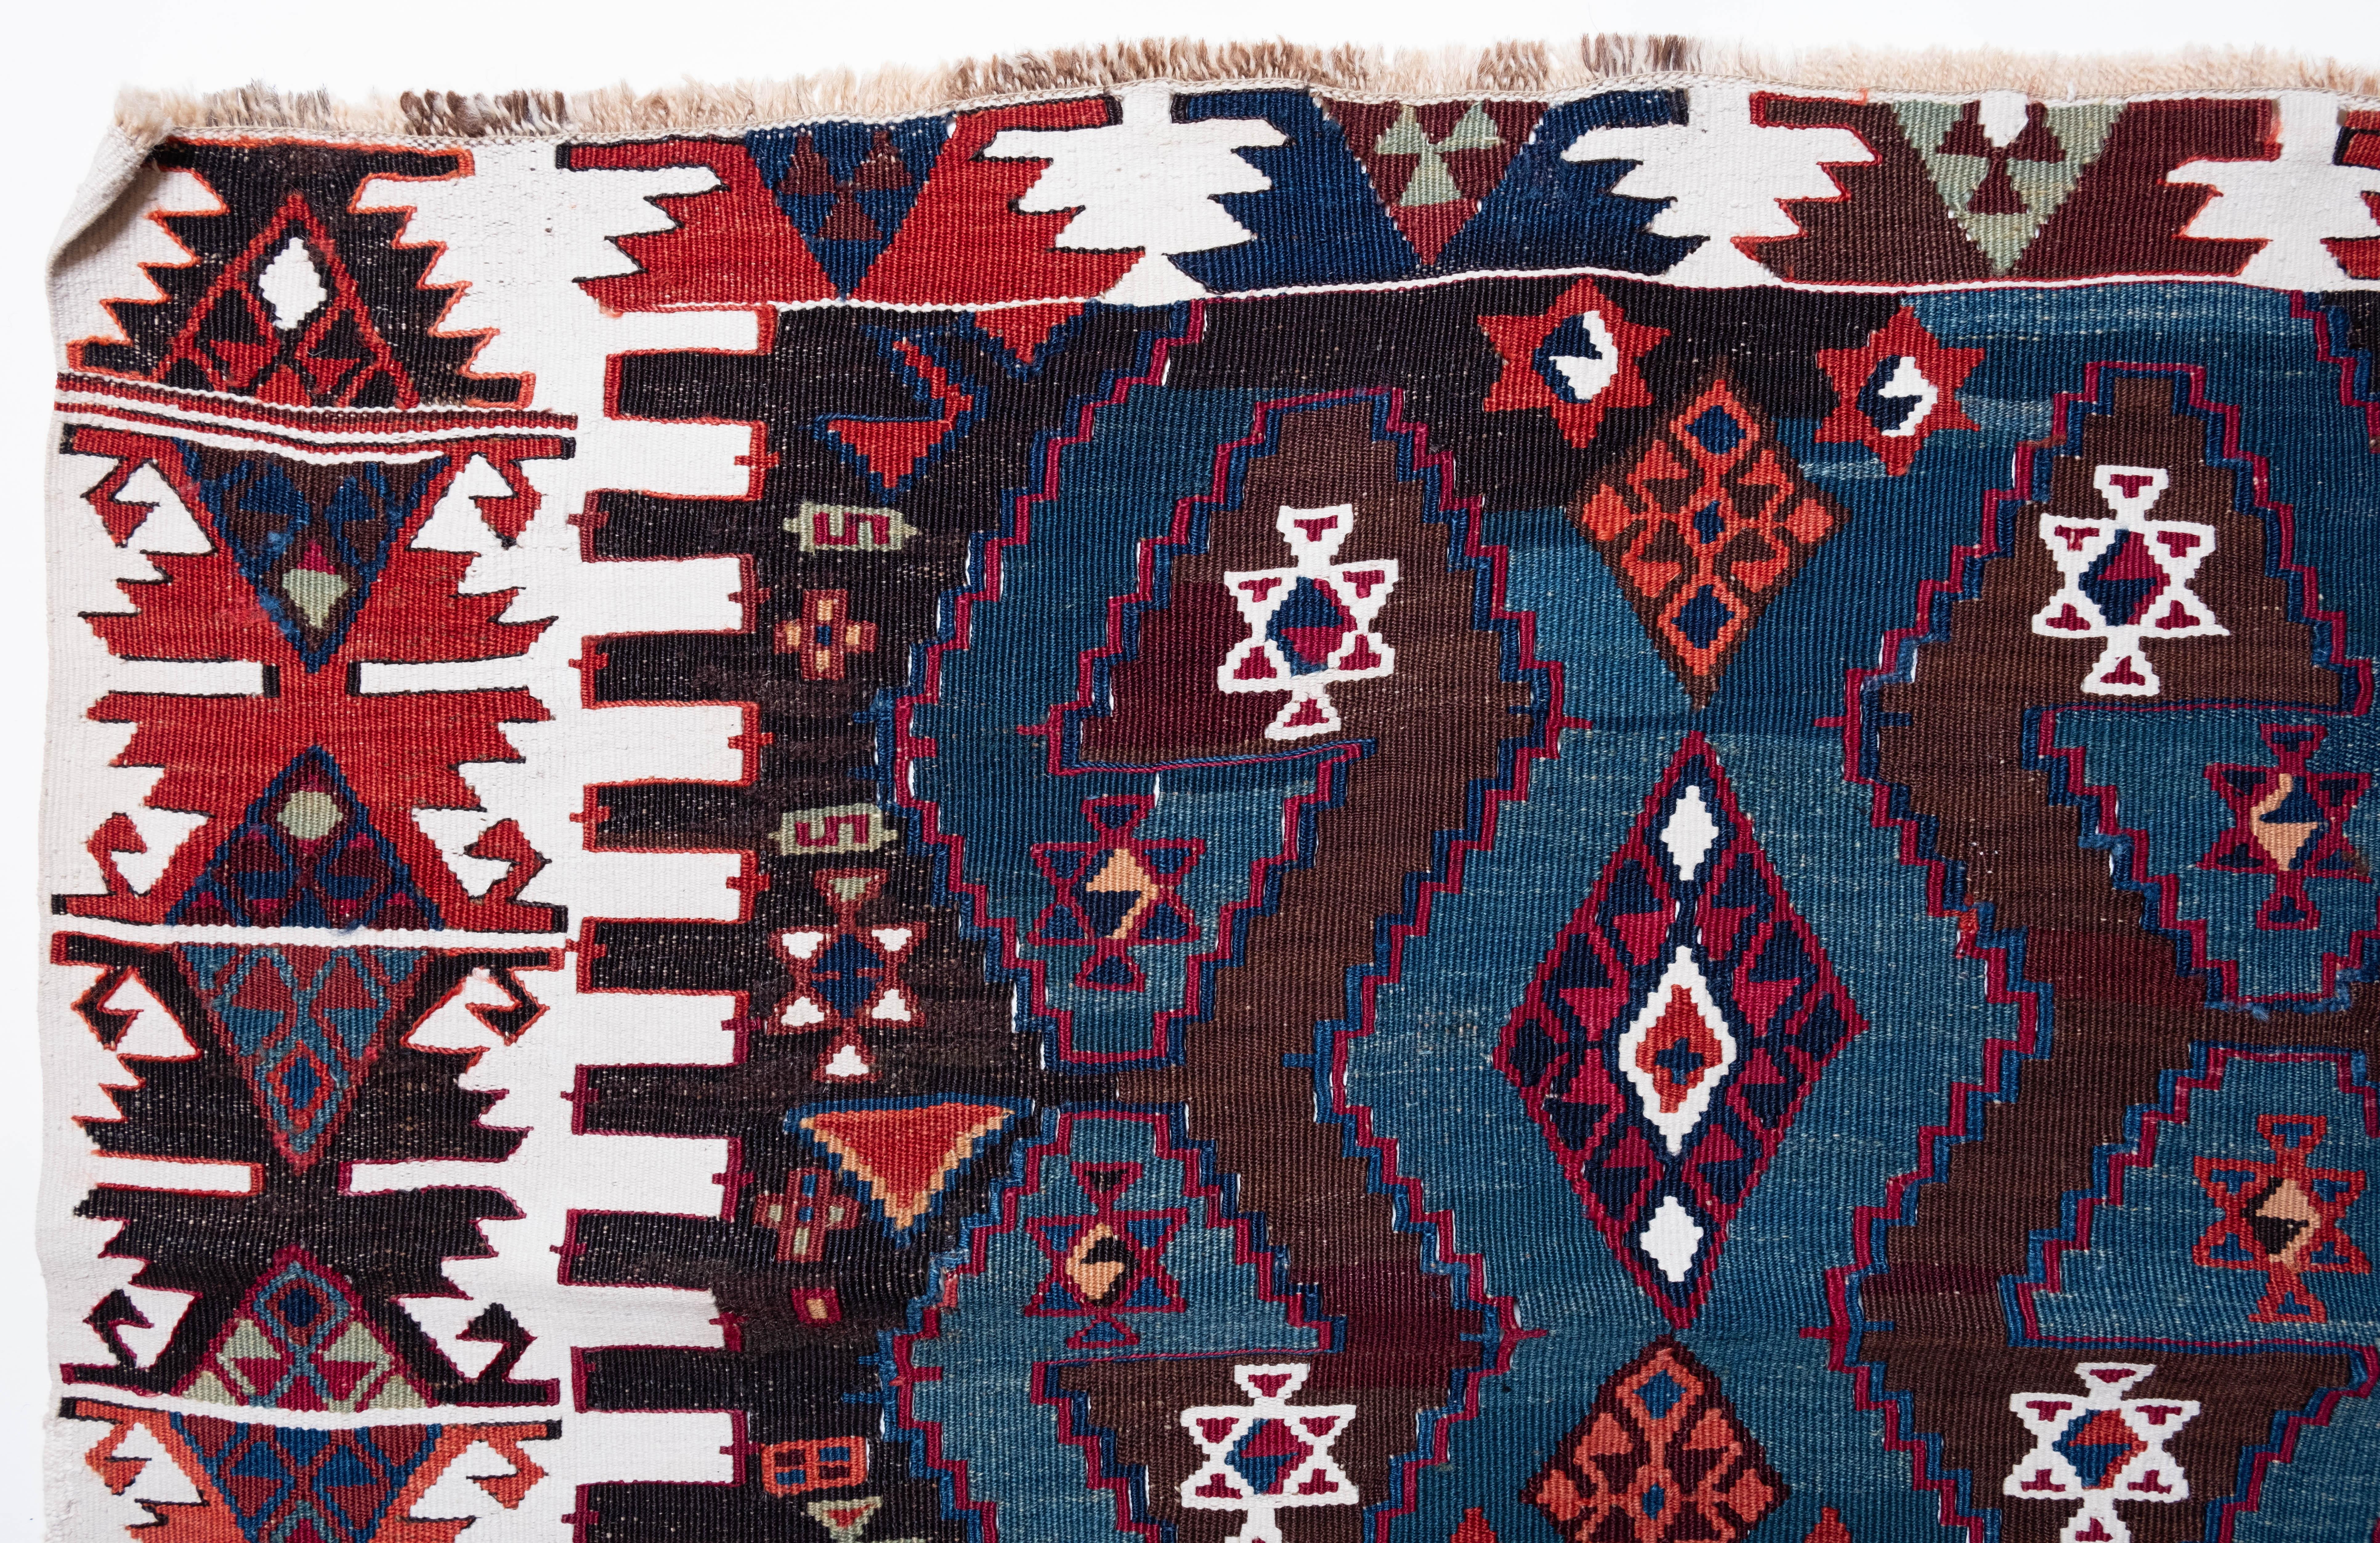 This is Eastern Anatolian Antique Kilim from the Reyhanli region with a rare and beautiful color composition.

This highly collectible antique kilim has wonderful special colors and textures that are typical of an old kilim in good condition. It is